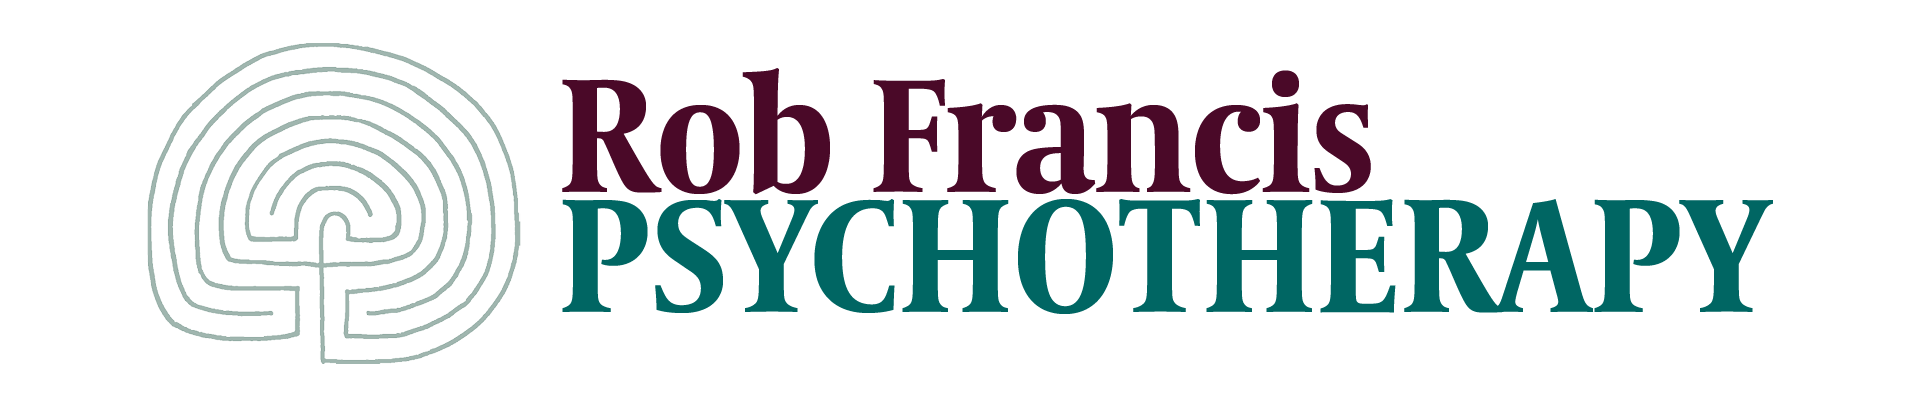 To the left is a light grey-green graphic of a Cretan labyrinth, alongside the text Rob Francis PSYCHOTHERAPY in deep red and blue-green.